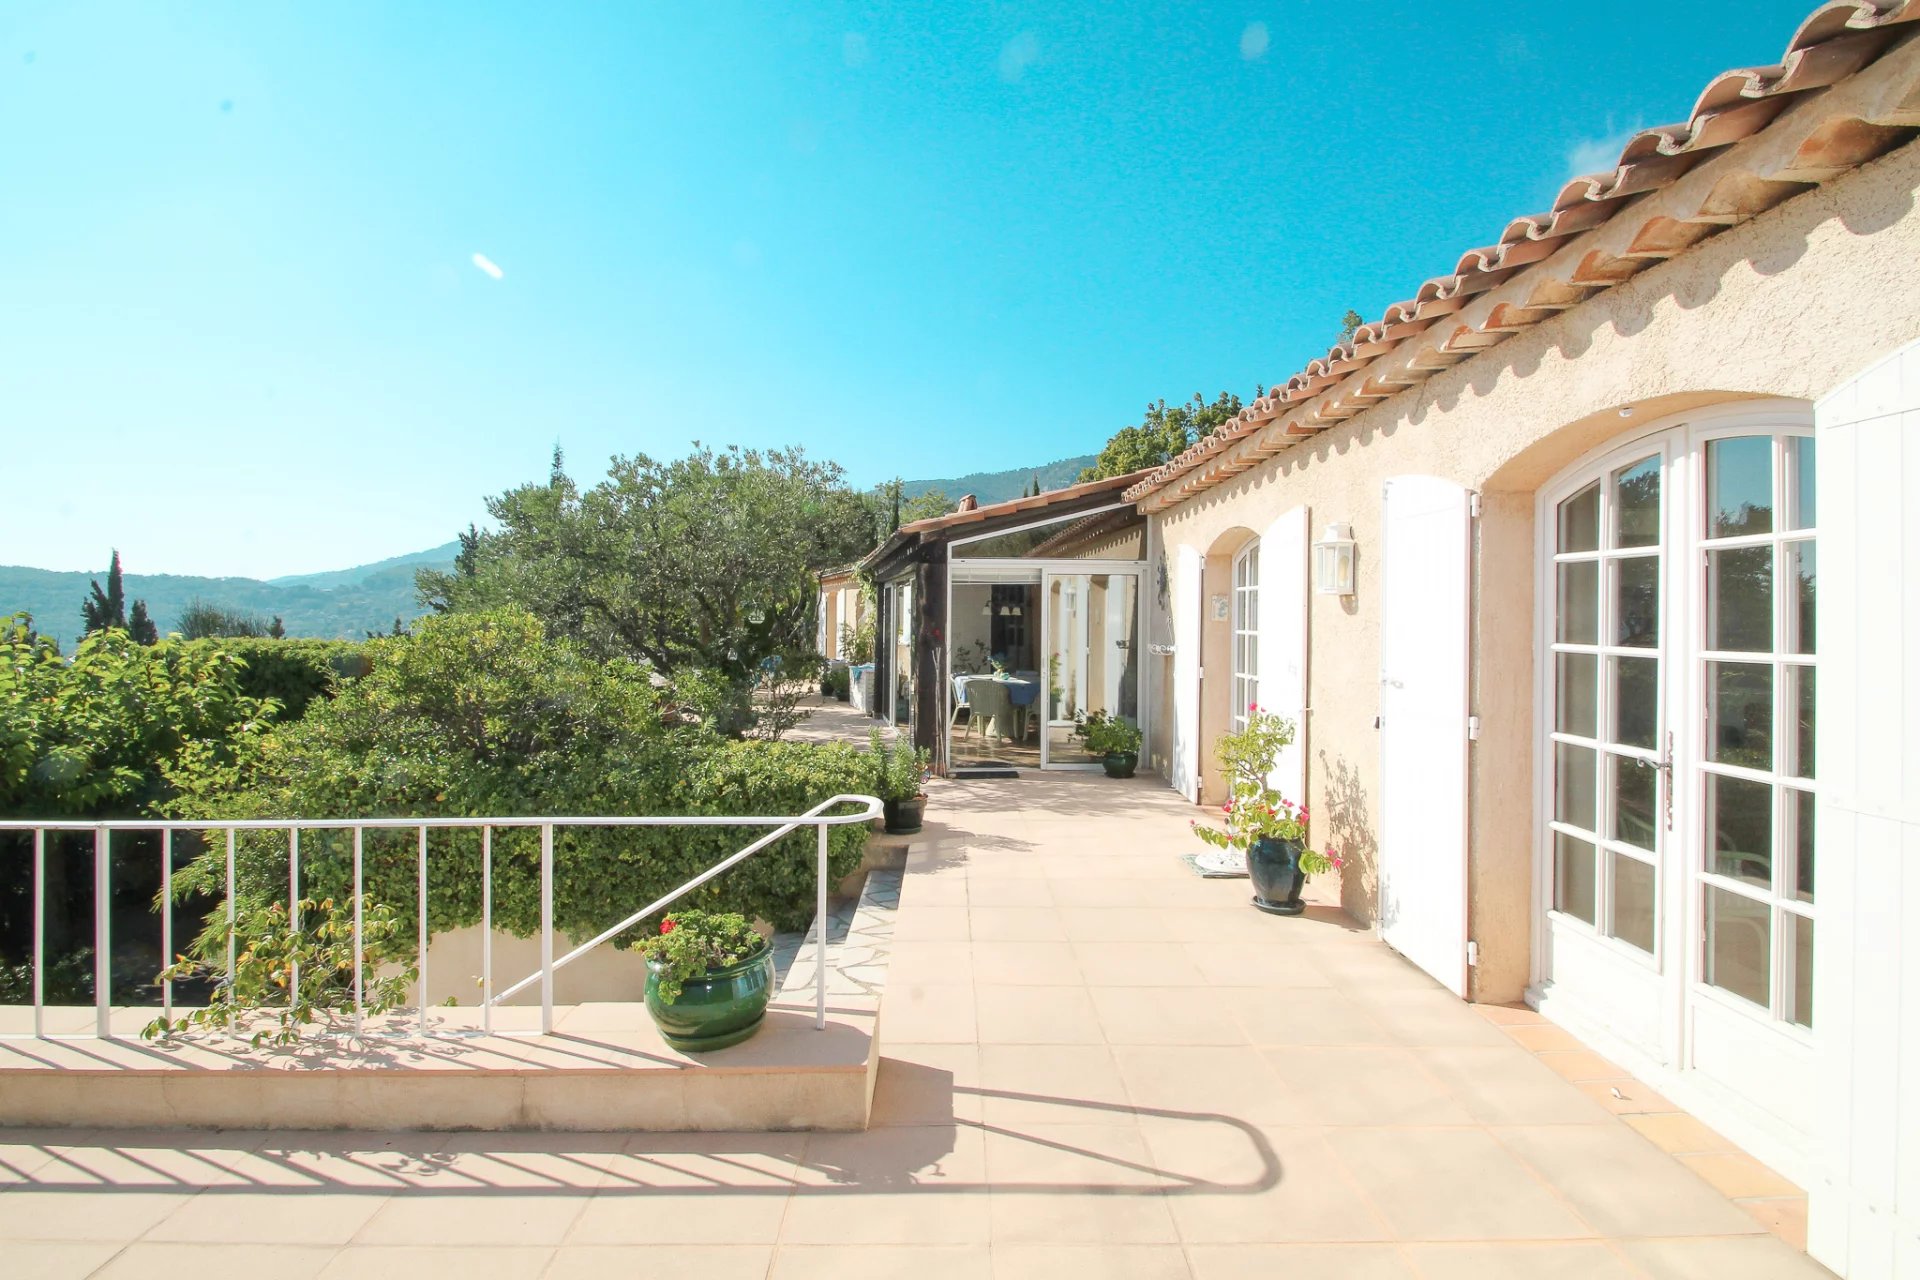 Beautiful single-story villa with panoramic views nestled in the stunning Provencal countryside.